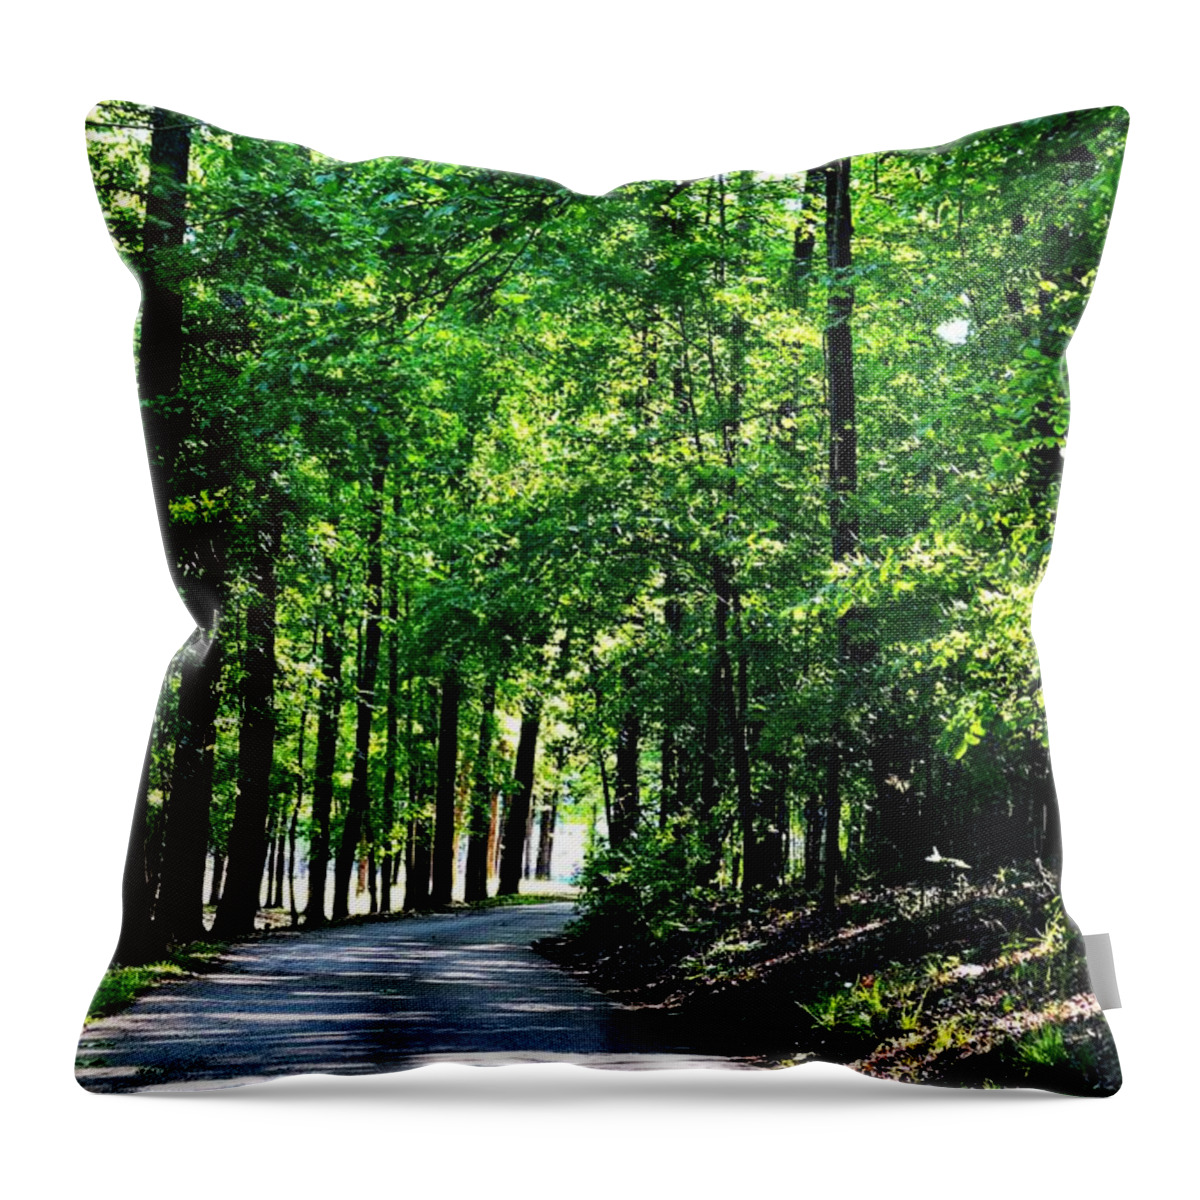 Time Throw Pillow featuring the photograph Once Upon A Time by Maria Urso